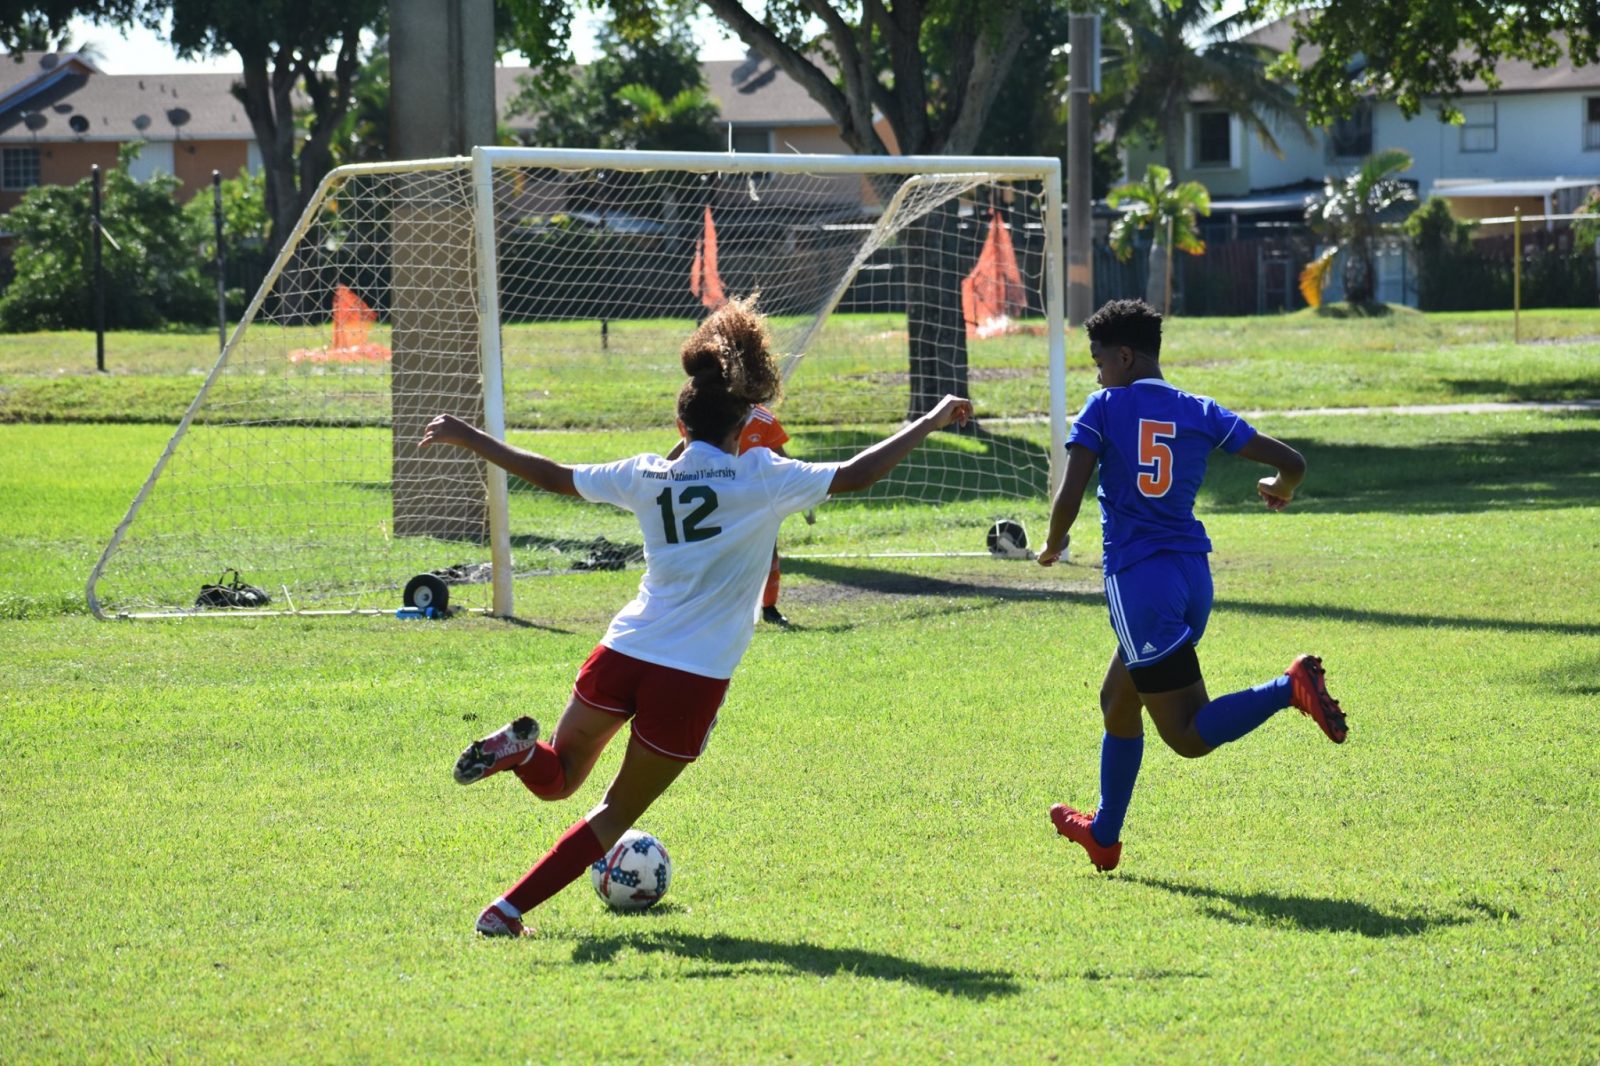 FNU Women's soccer player Dominique Mosley During the game - Copy